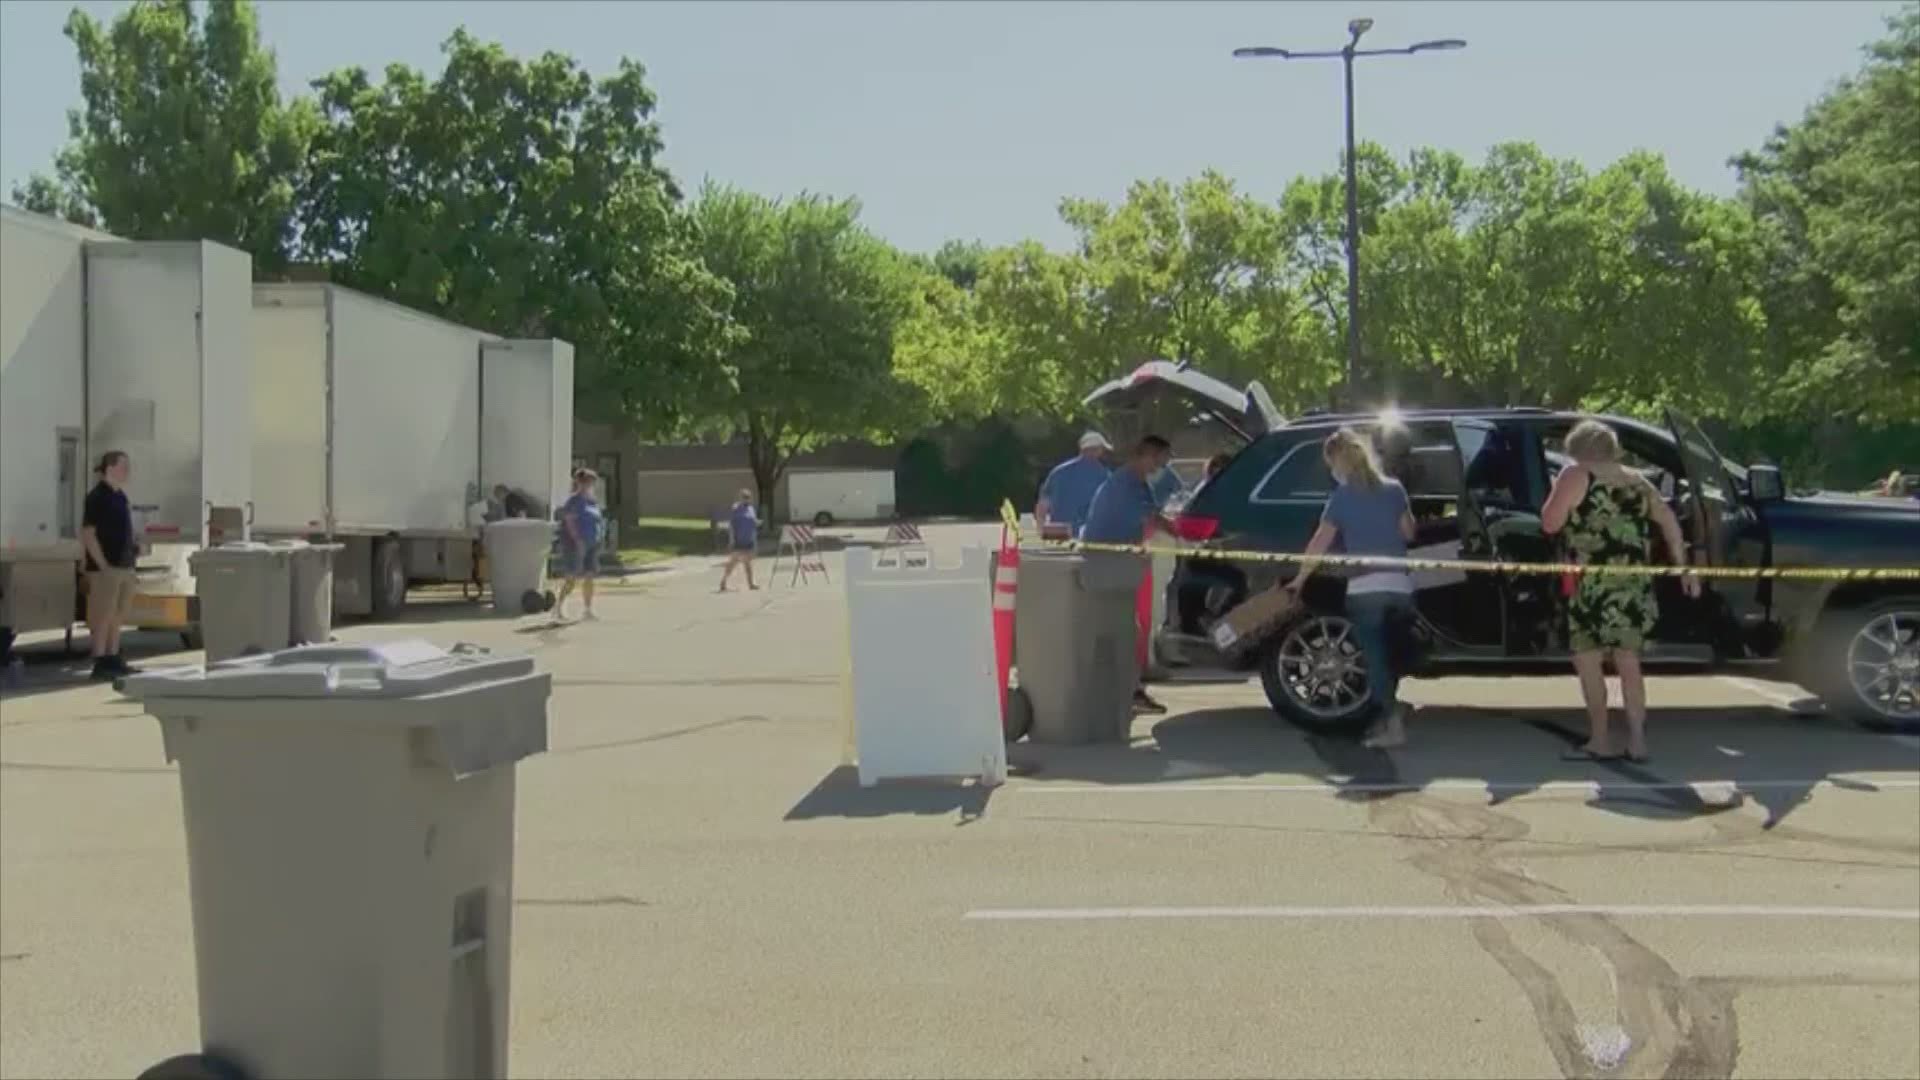 West Bank hosts contactfree shred day in West Des Moines